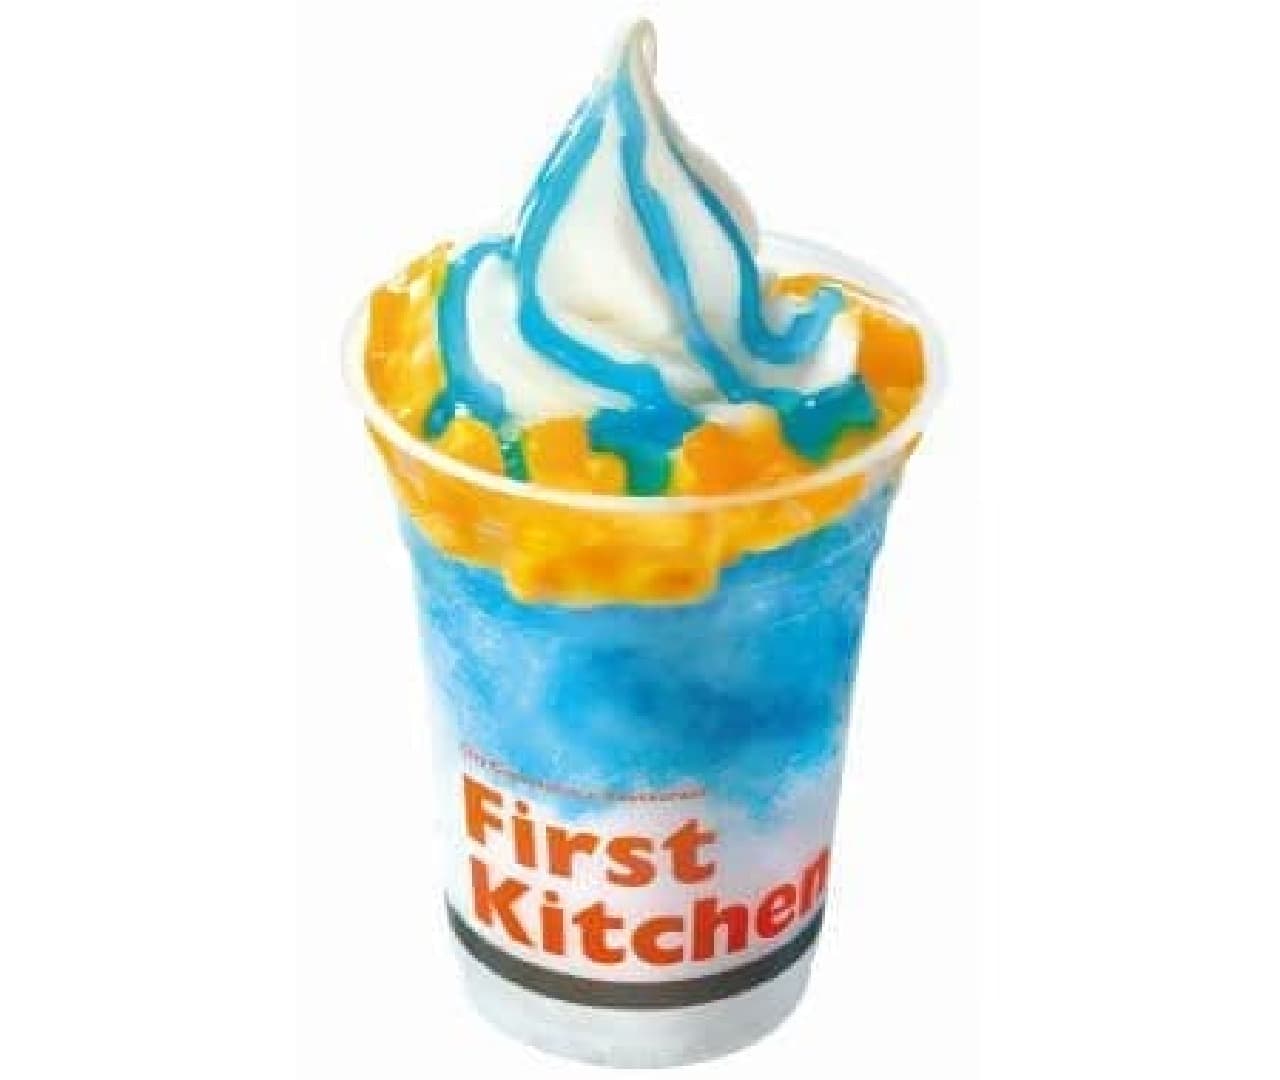 "Blue Hawaii & Mango" is a sweet that is topped with soft serve ice cream and mango sauce.